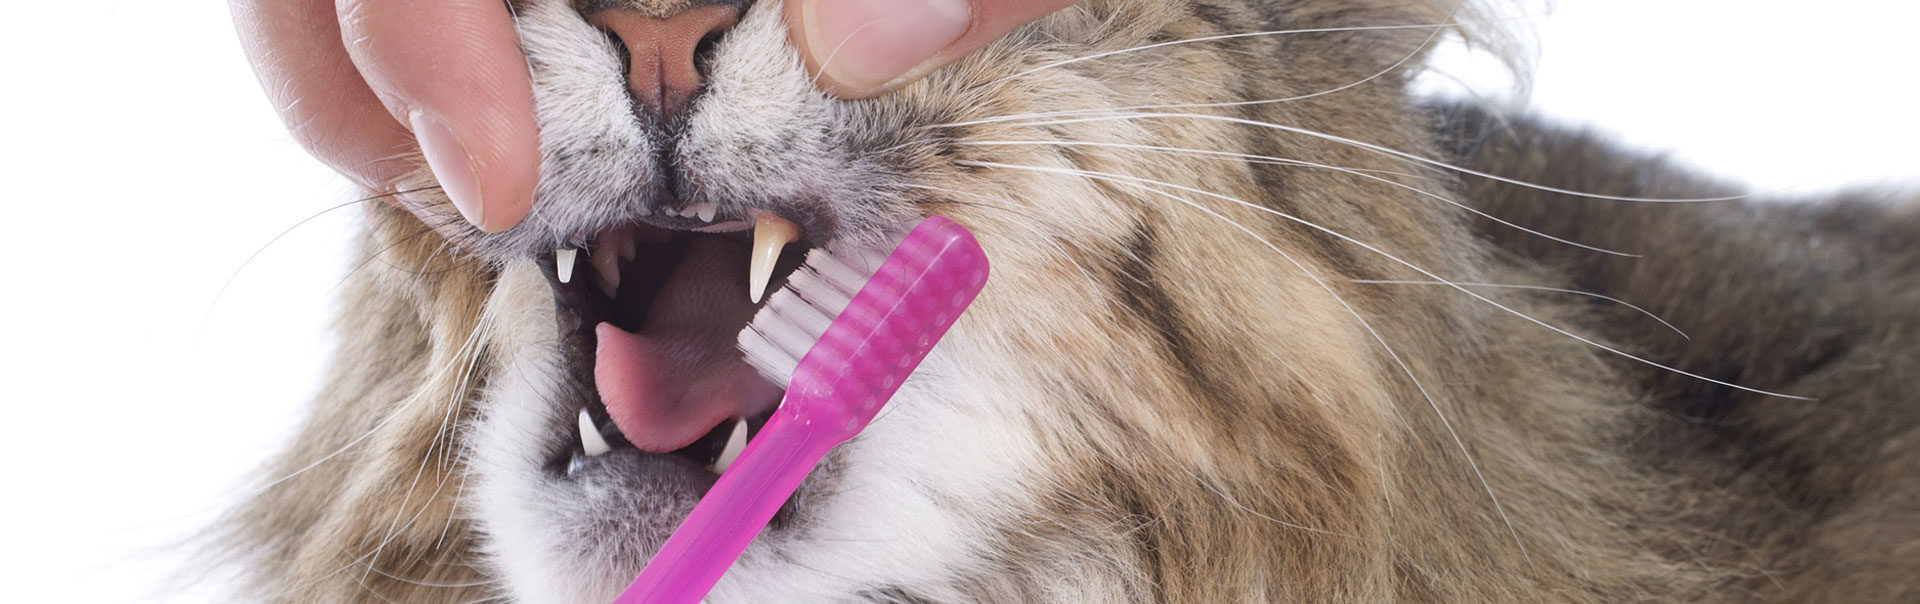 Cat getting its teeth brushed